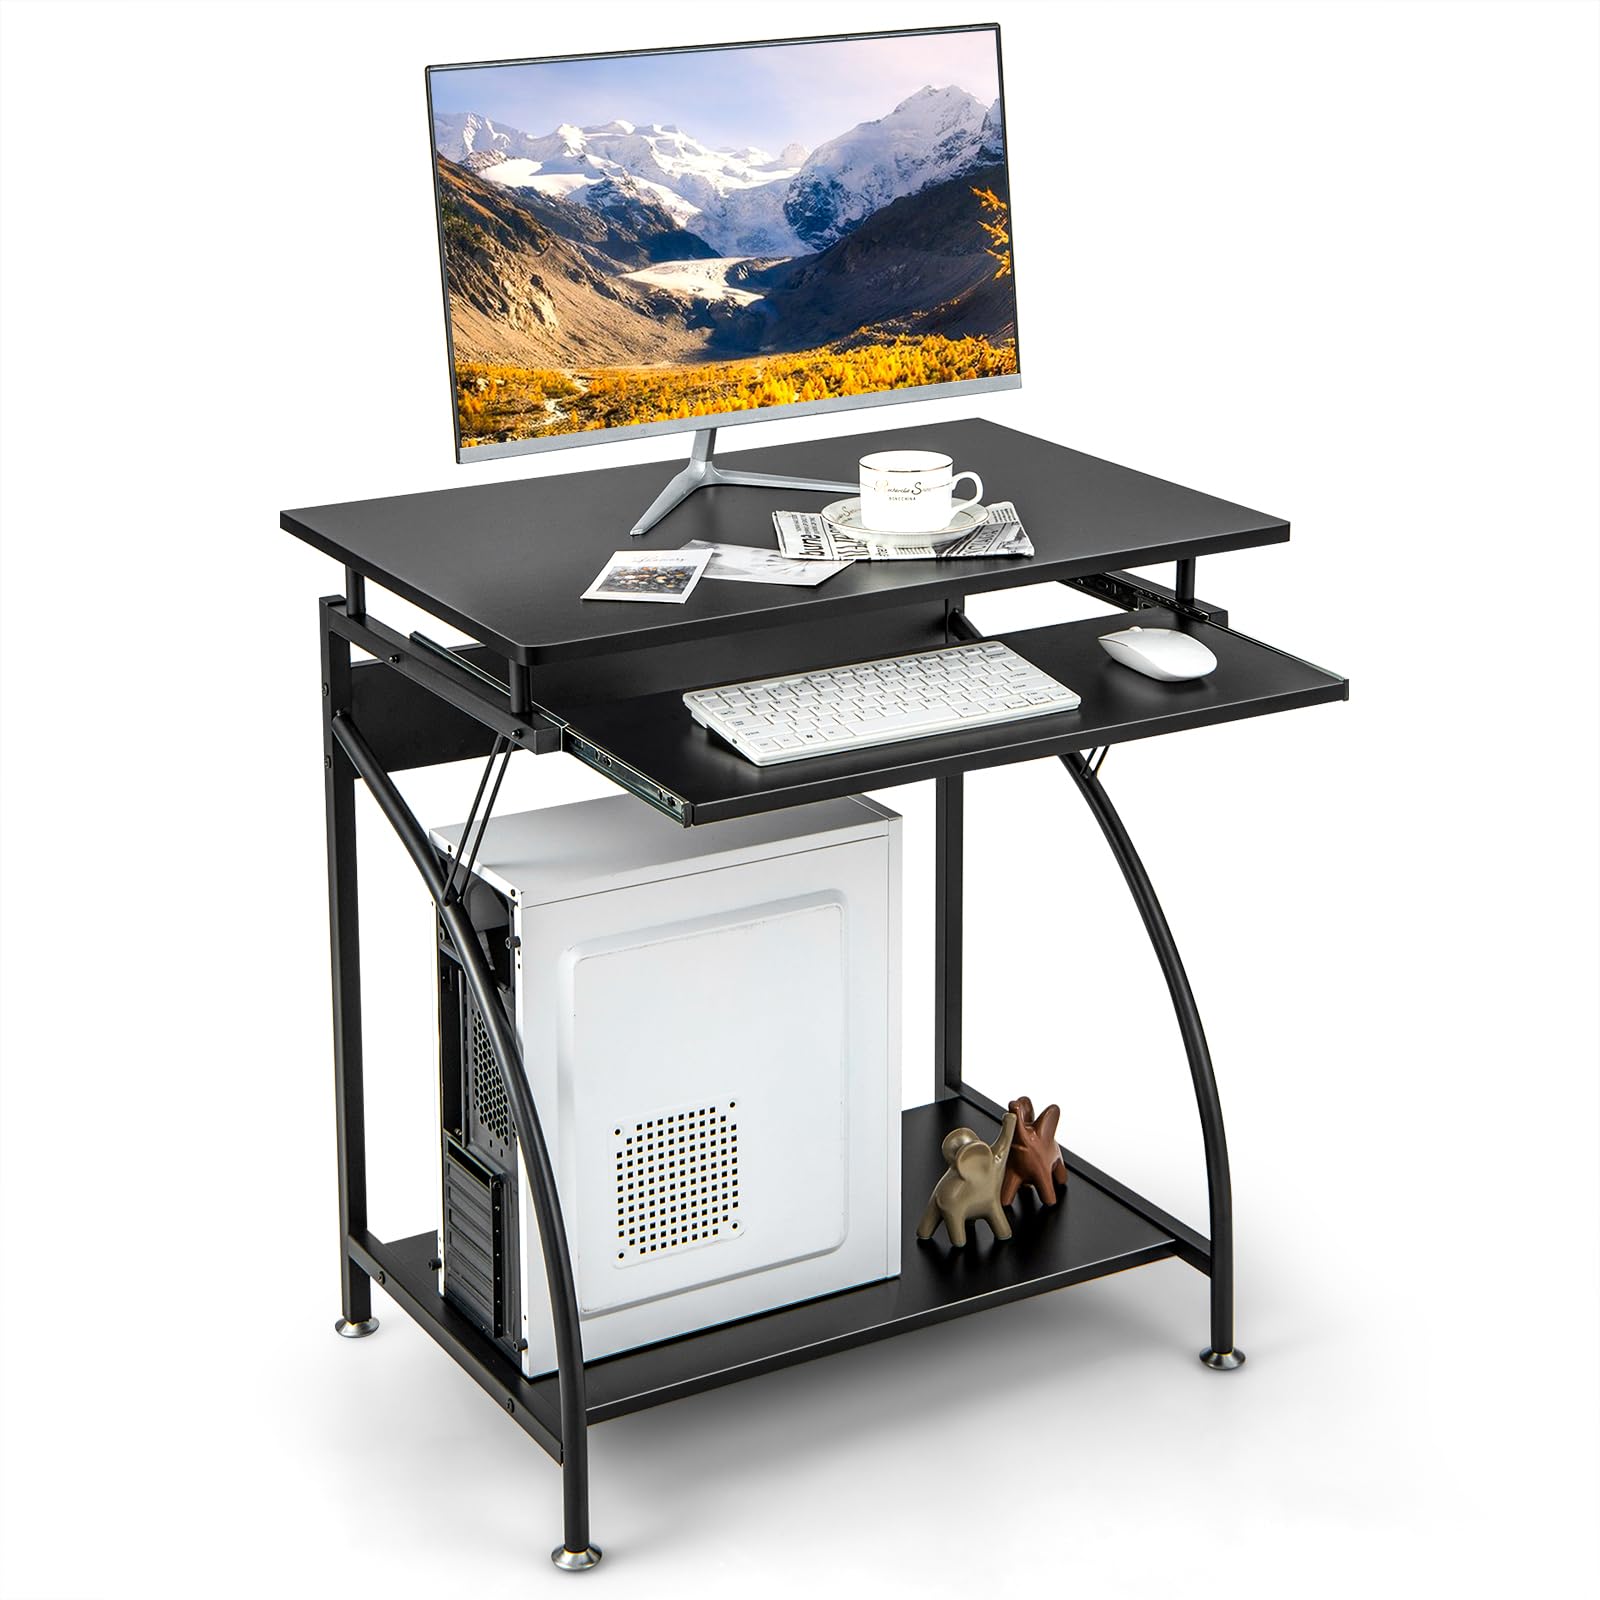 Giantex Computer Desk for Small Spaces, 27.5" Laptop Table with Pull-Out Keyboard Tray & Bottom Storage Shelf